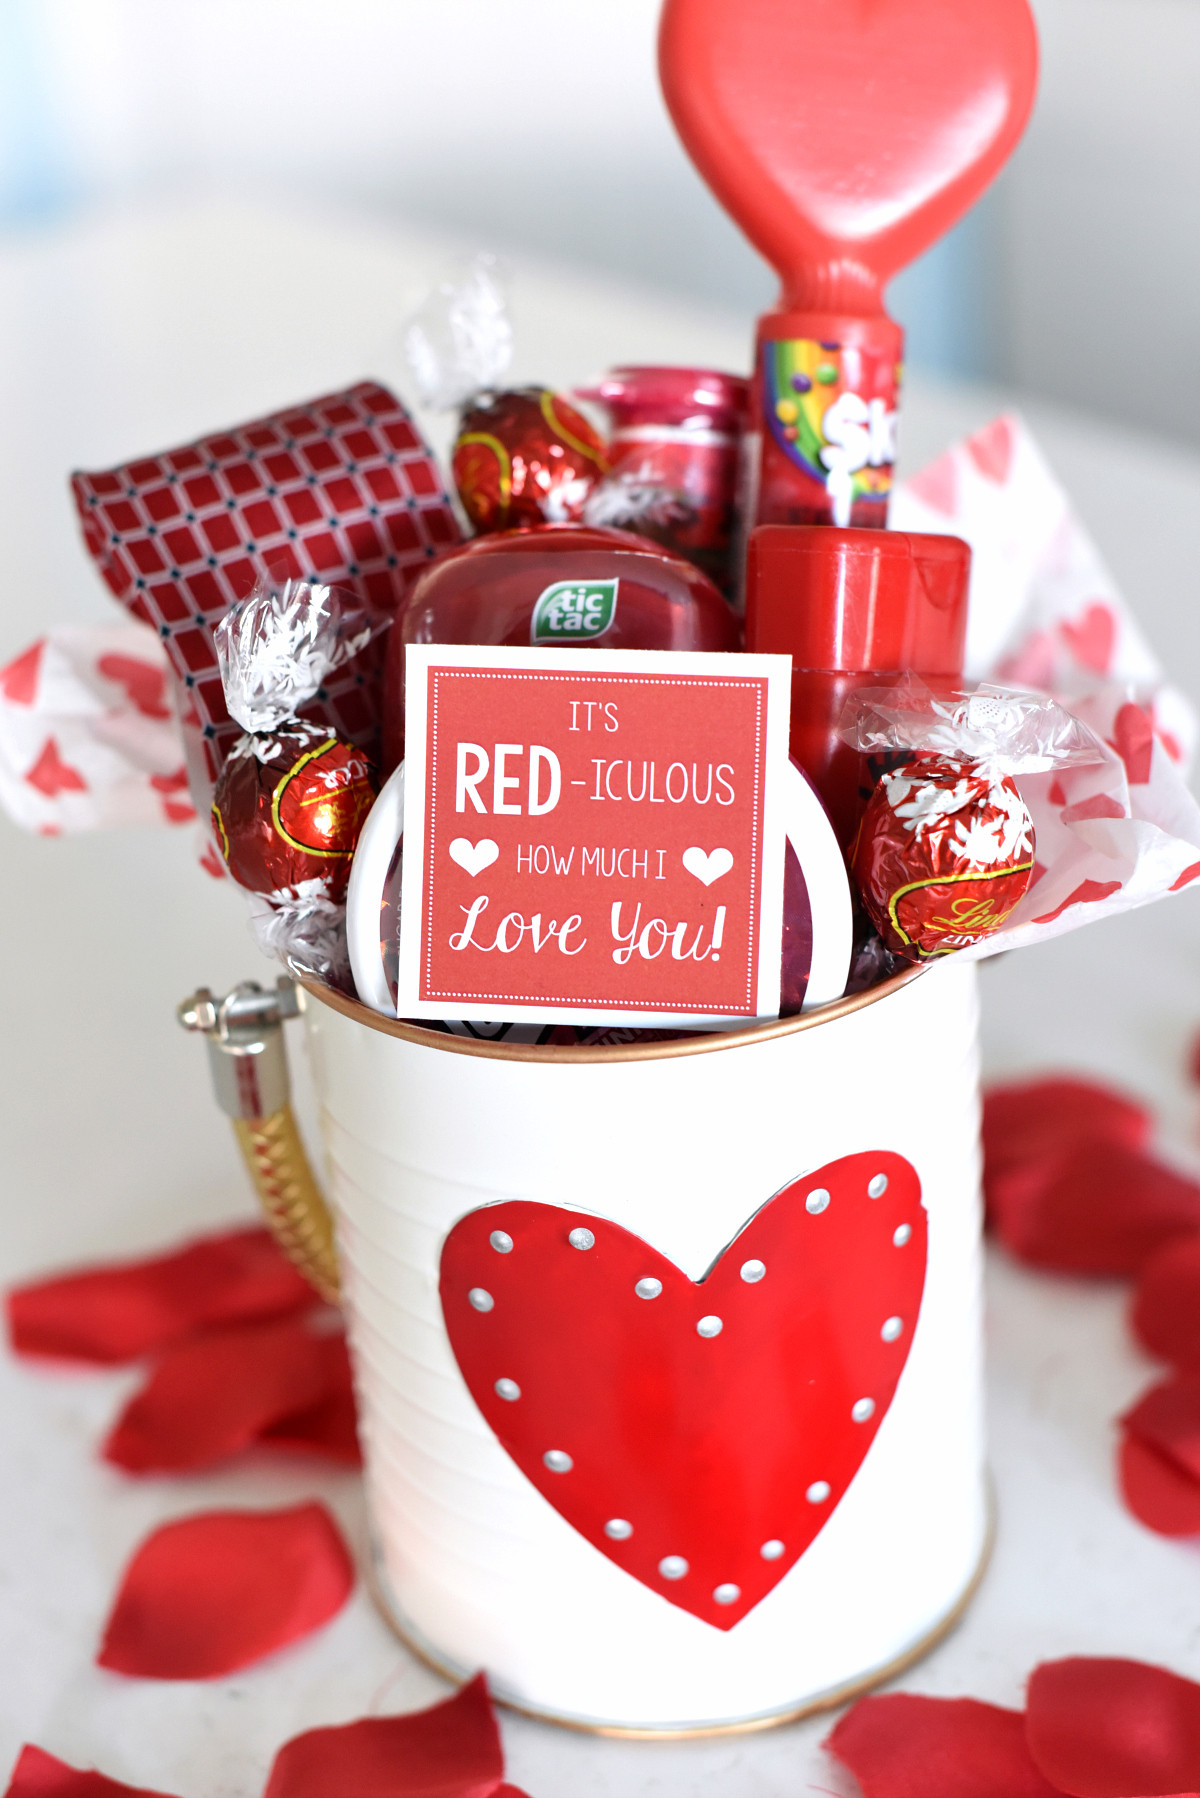 Husband Valentine Gift Ideas
 Cute Valentine s Day Gift Idea RED iculous Basket